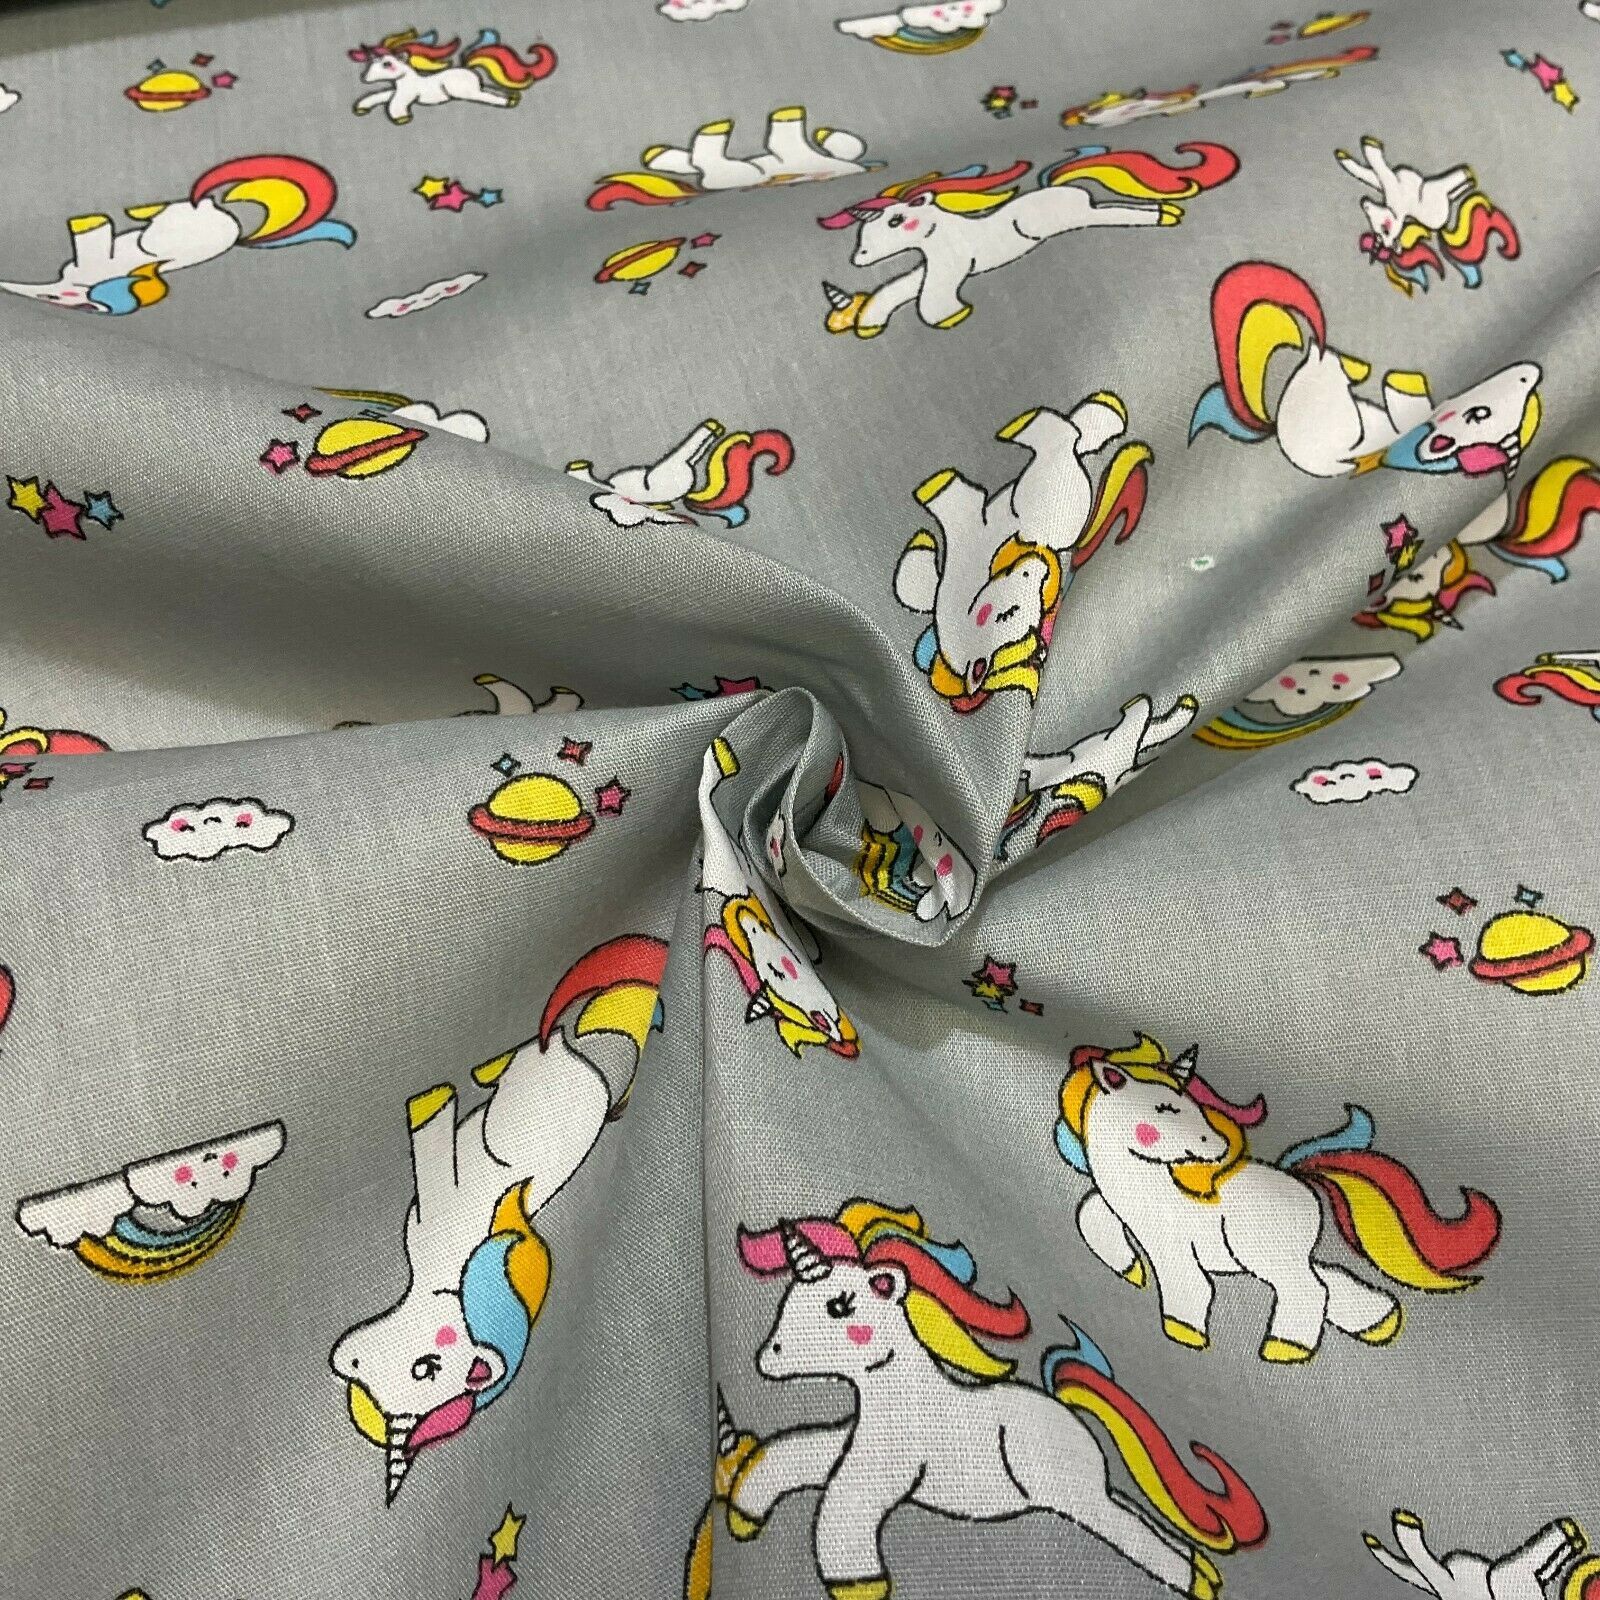 Unicorn Mystical Magical Novelty Poly cotton printed lightweight fabric M1634